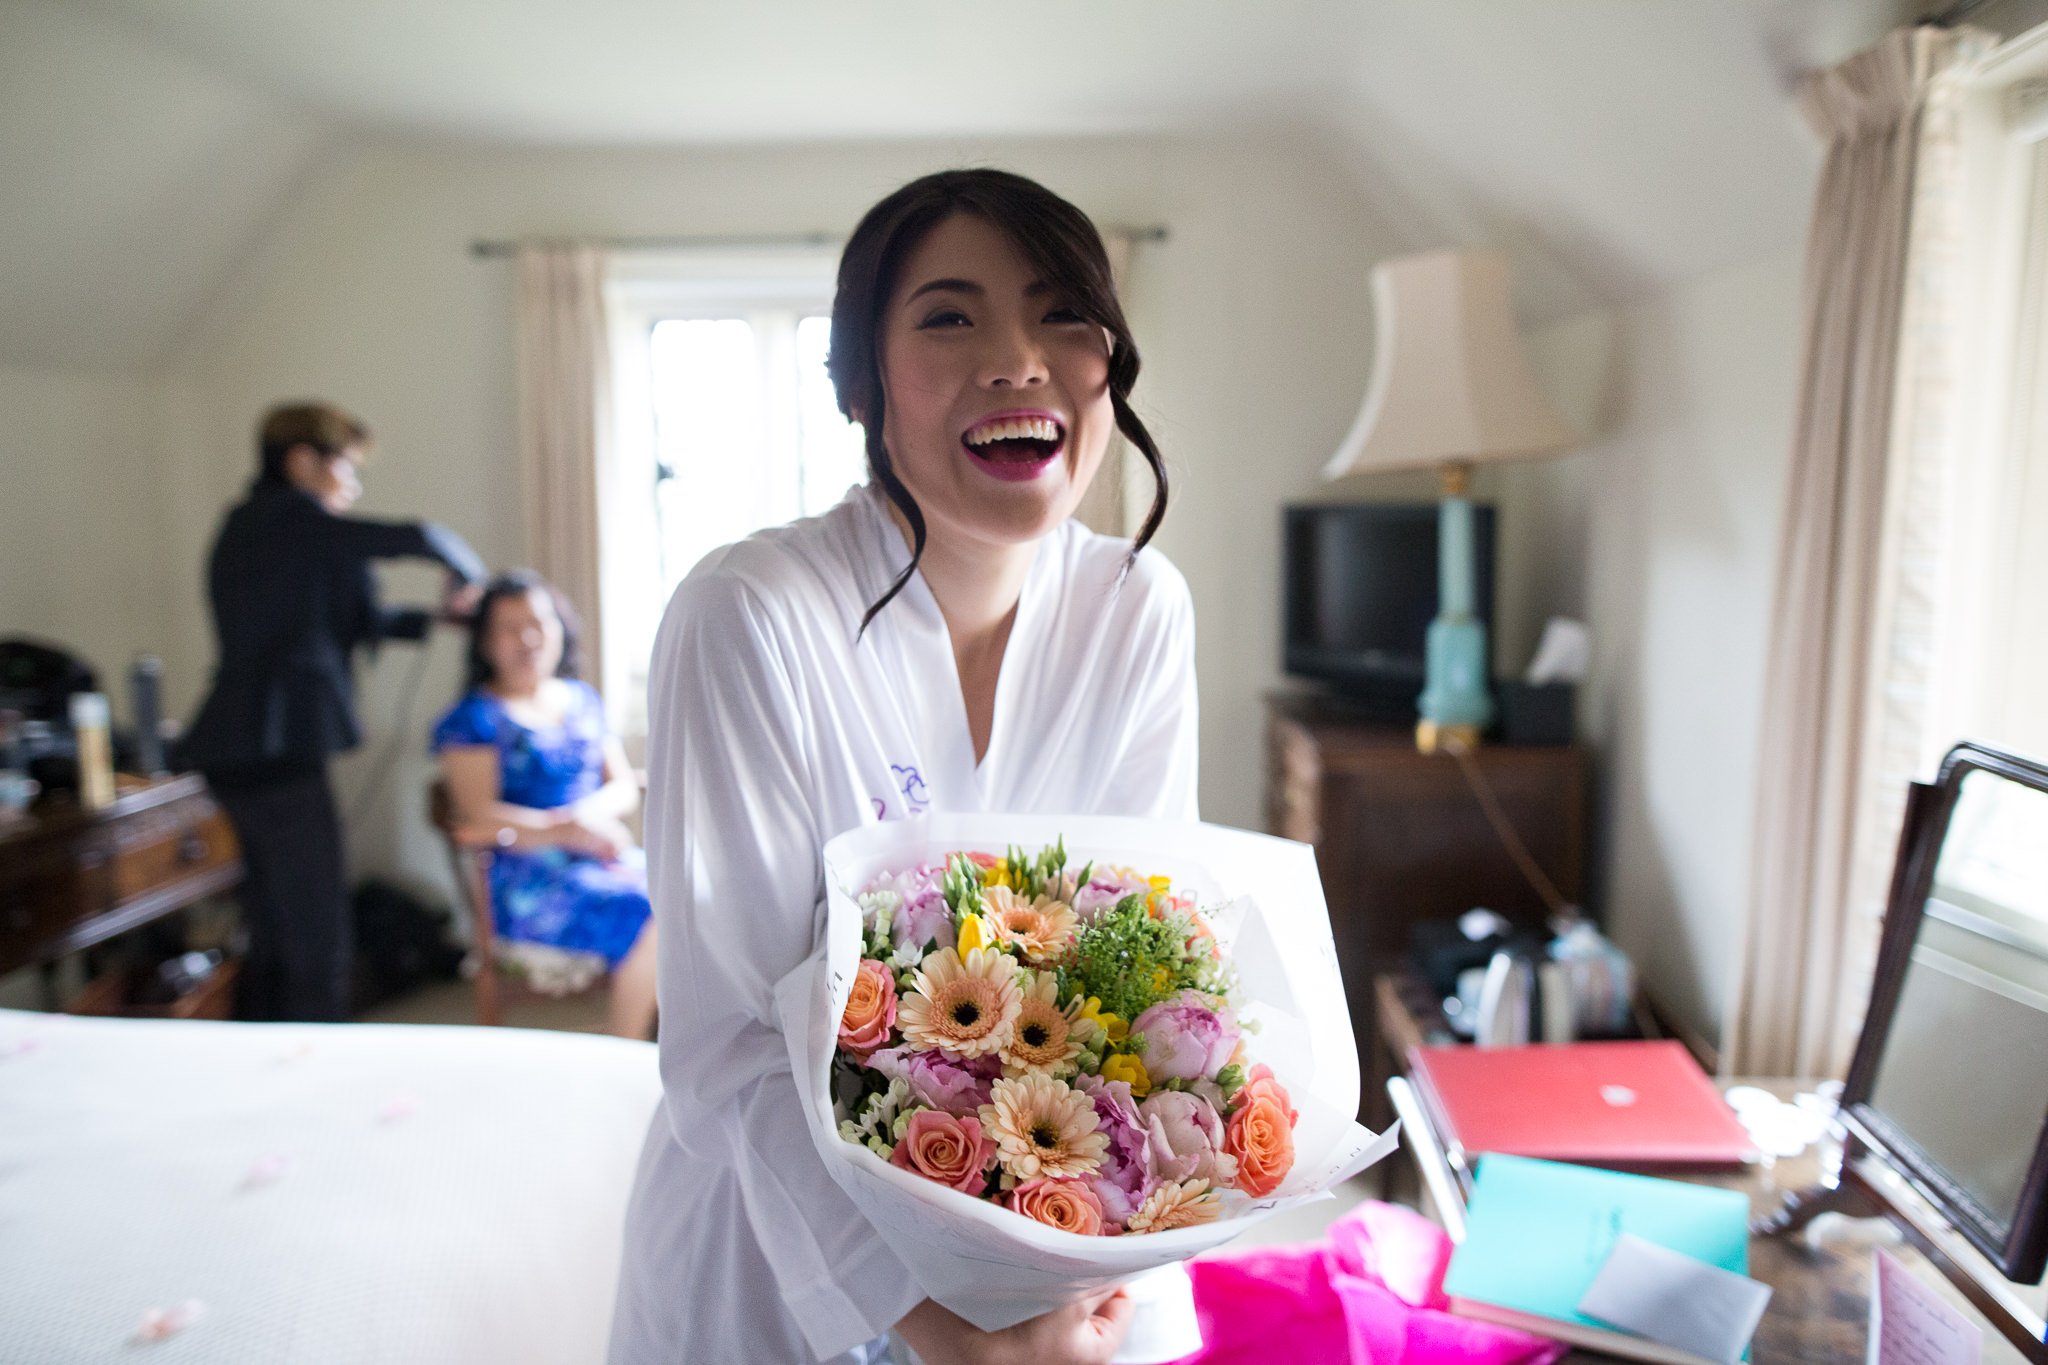  Bride smiling with bouquet of flowers 